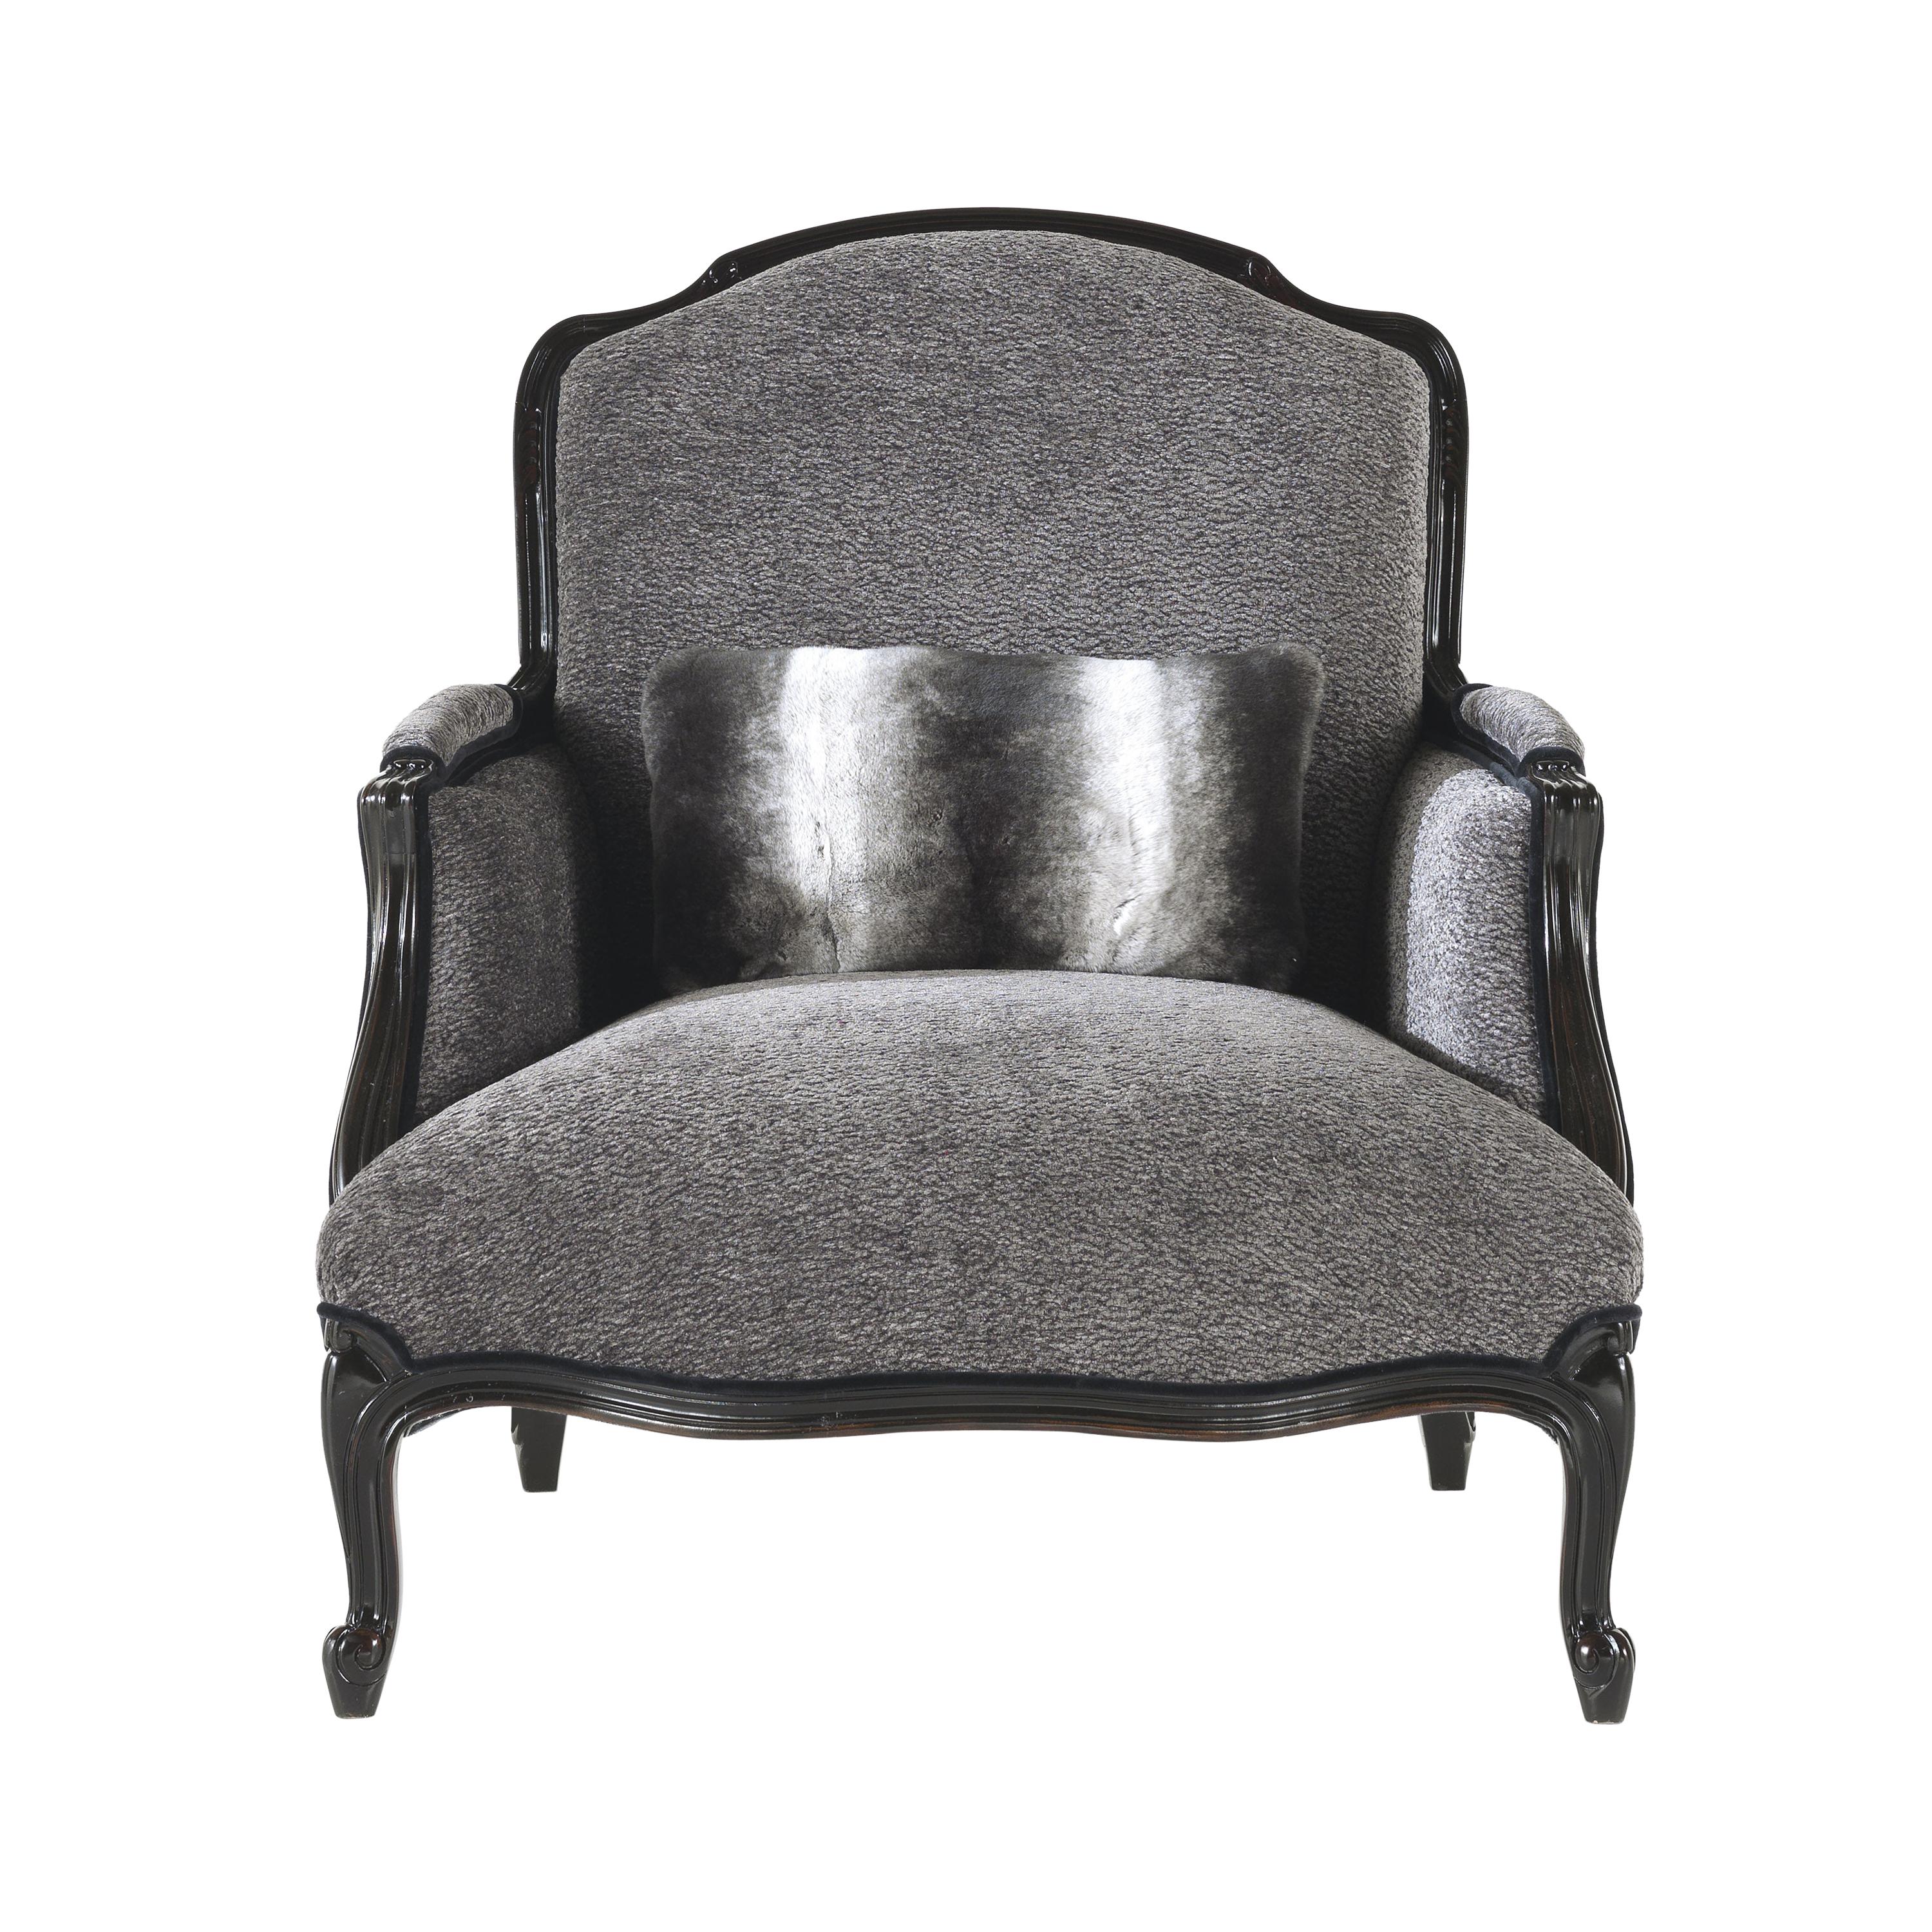 Gianfranco Ferré Home Welcome Armchair in Grey Woven Fabric For Sale